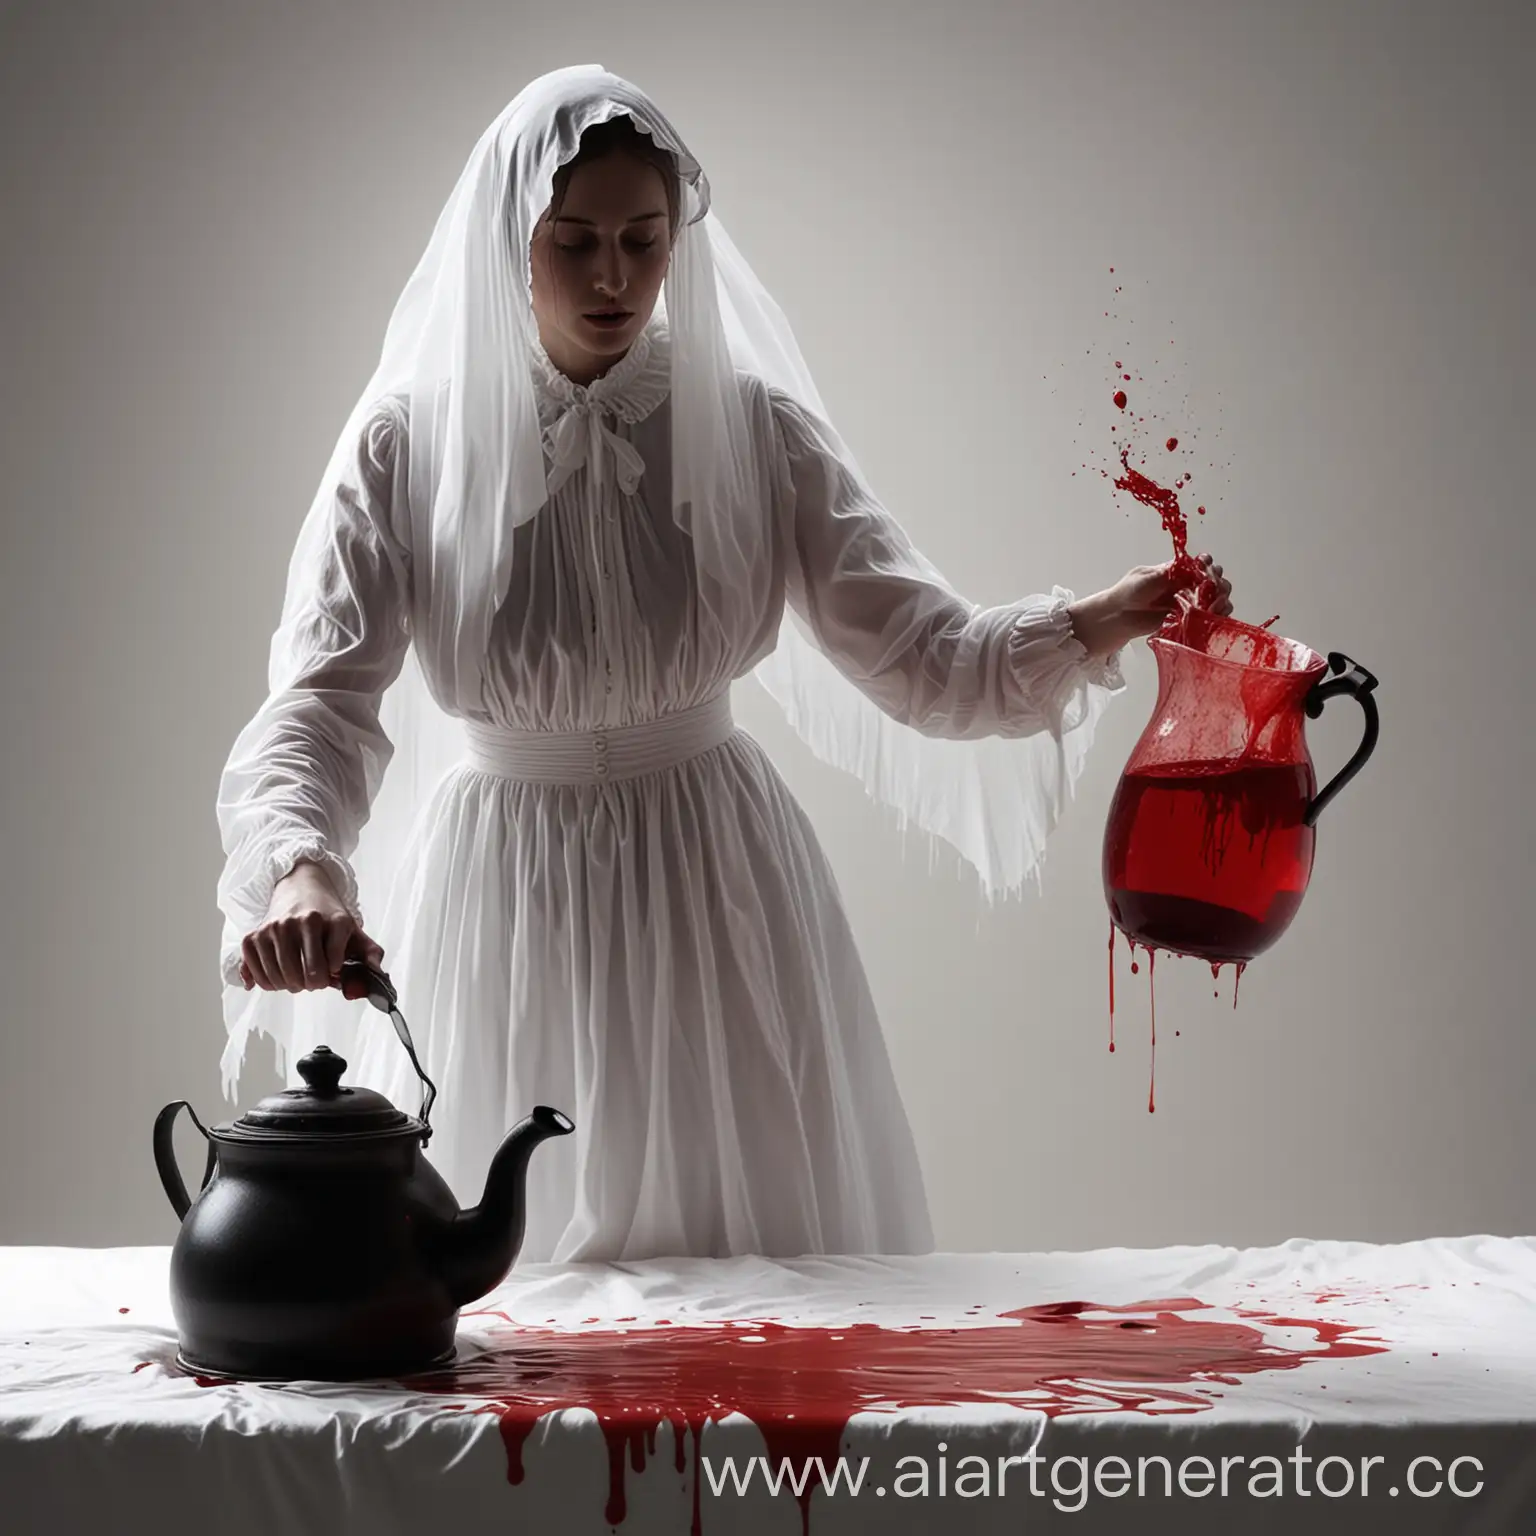 A female silhouette in a white sheet looking like a Victorian ghost pours a red liquid similar to blood from a kettle